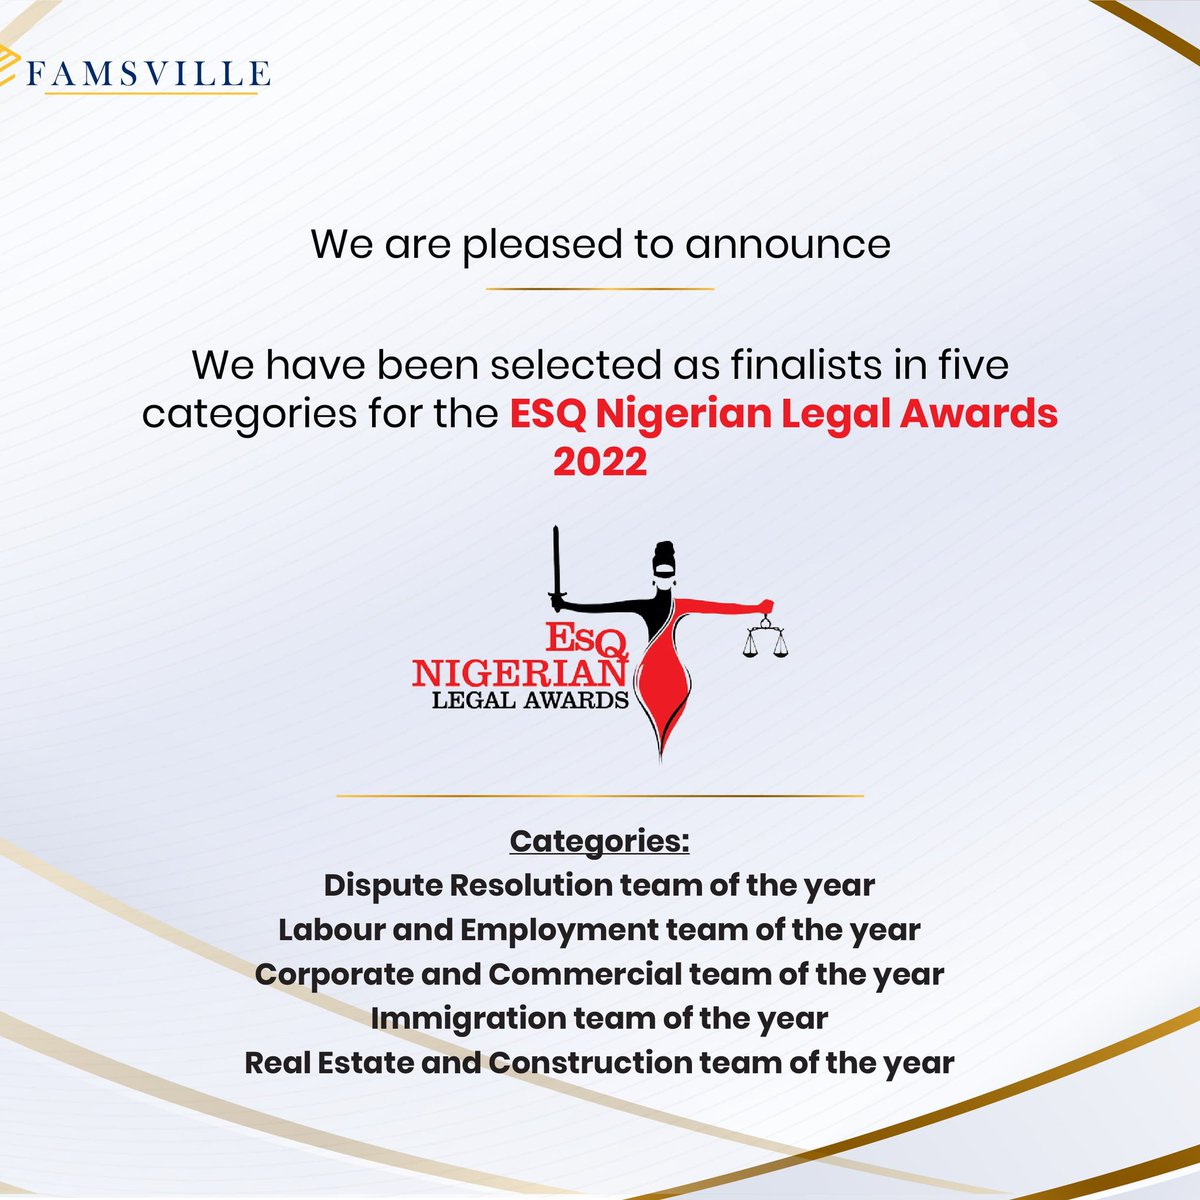 Go Famsville ⚡⚡

Kudos to the whole team...it's our win 🥂🥂

#awards #awardnominee #awardnomination #legalcommunity #legaltwitter #legalcounsel #legalconnect #legalinstagram #lawfirm #legalawards #lawfirmnigeria